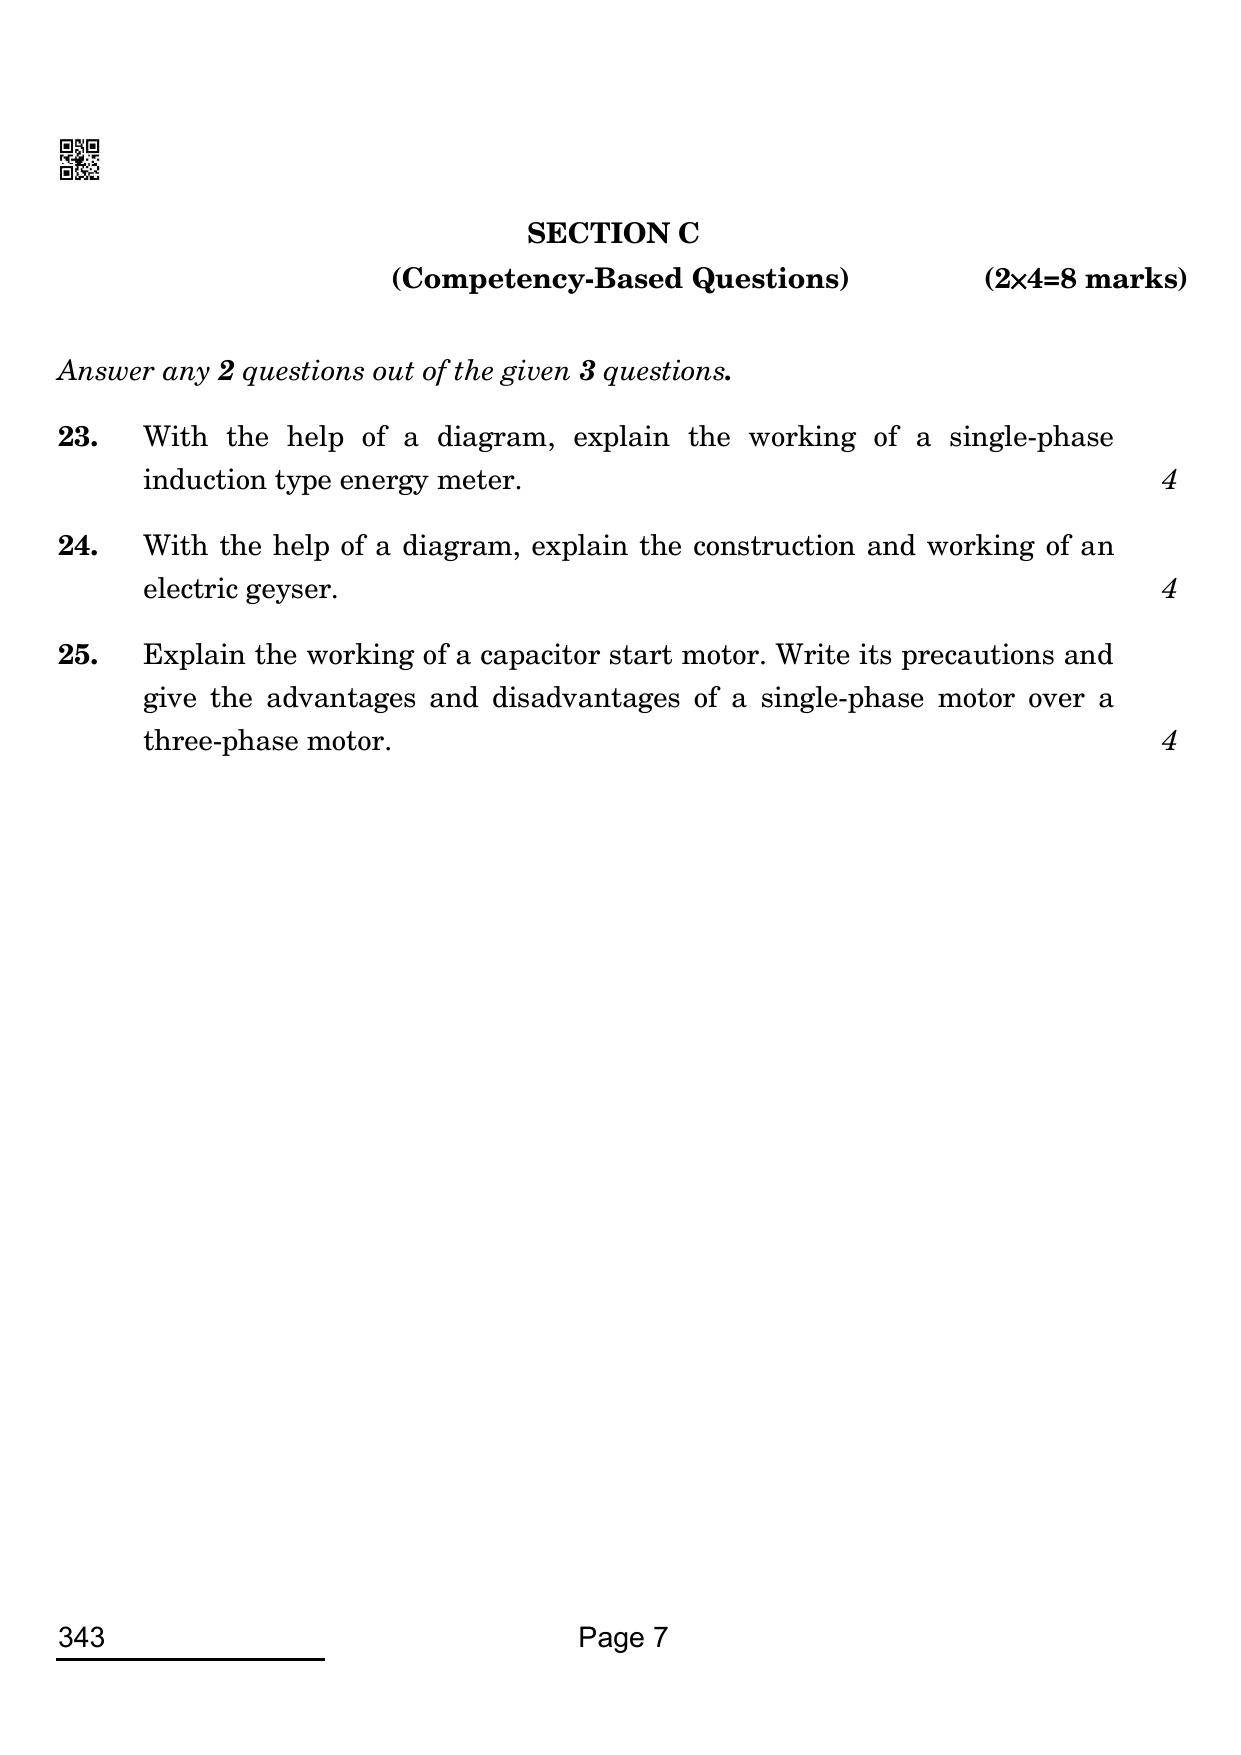 CBSE Class 12 343_Electrical Technology 2022 Question Paper - Page 7